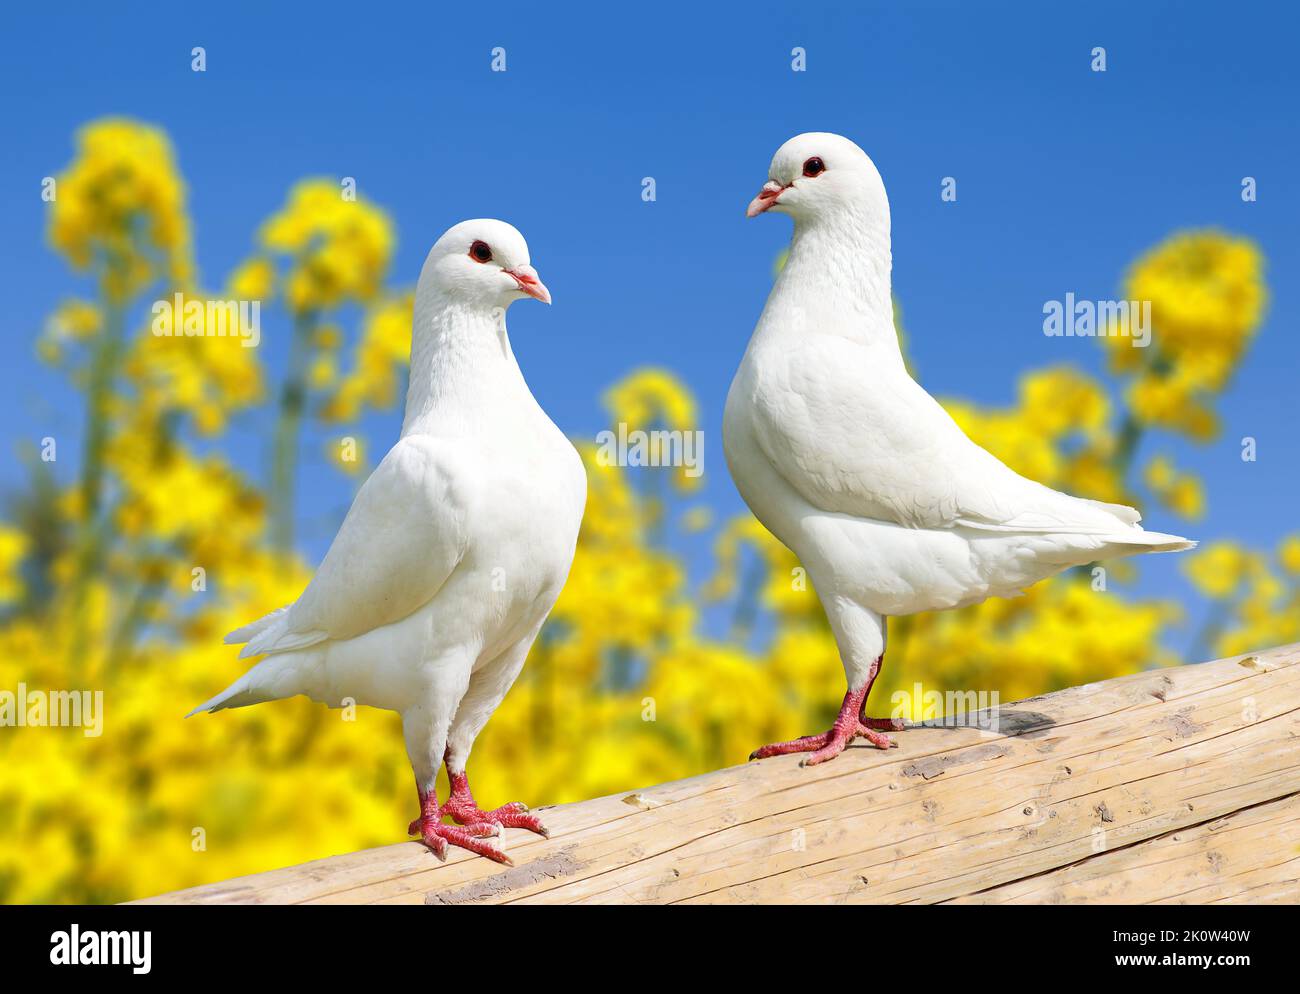 Beautiful view of two white pigeons on perch with yellow flowering rapeseed background and blue sky, imperial pigeon, ducula Stock Photo